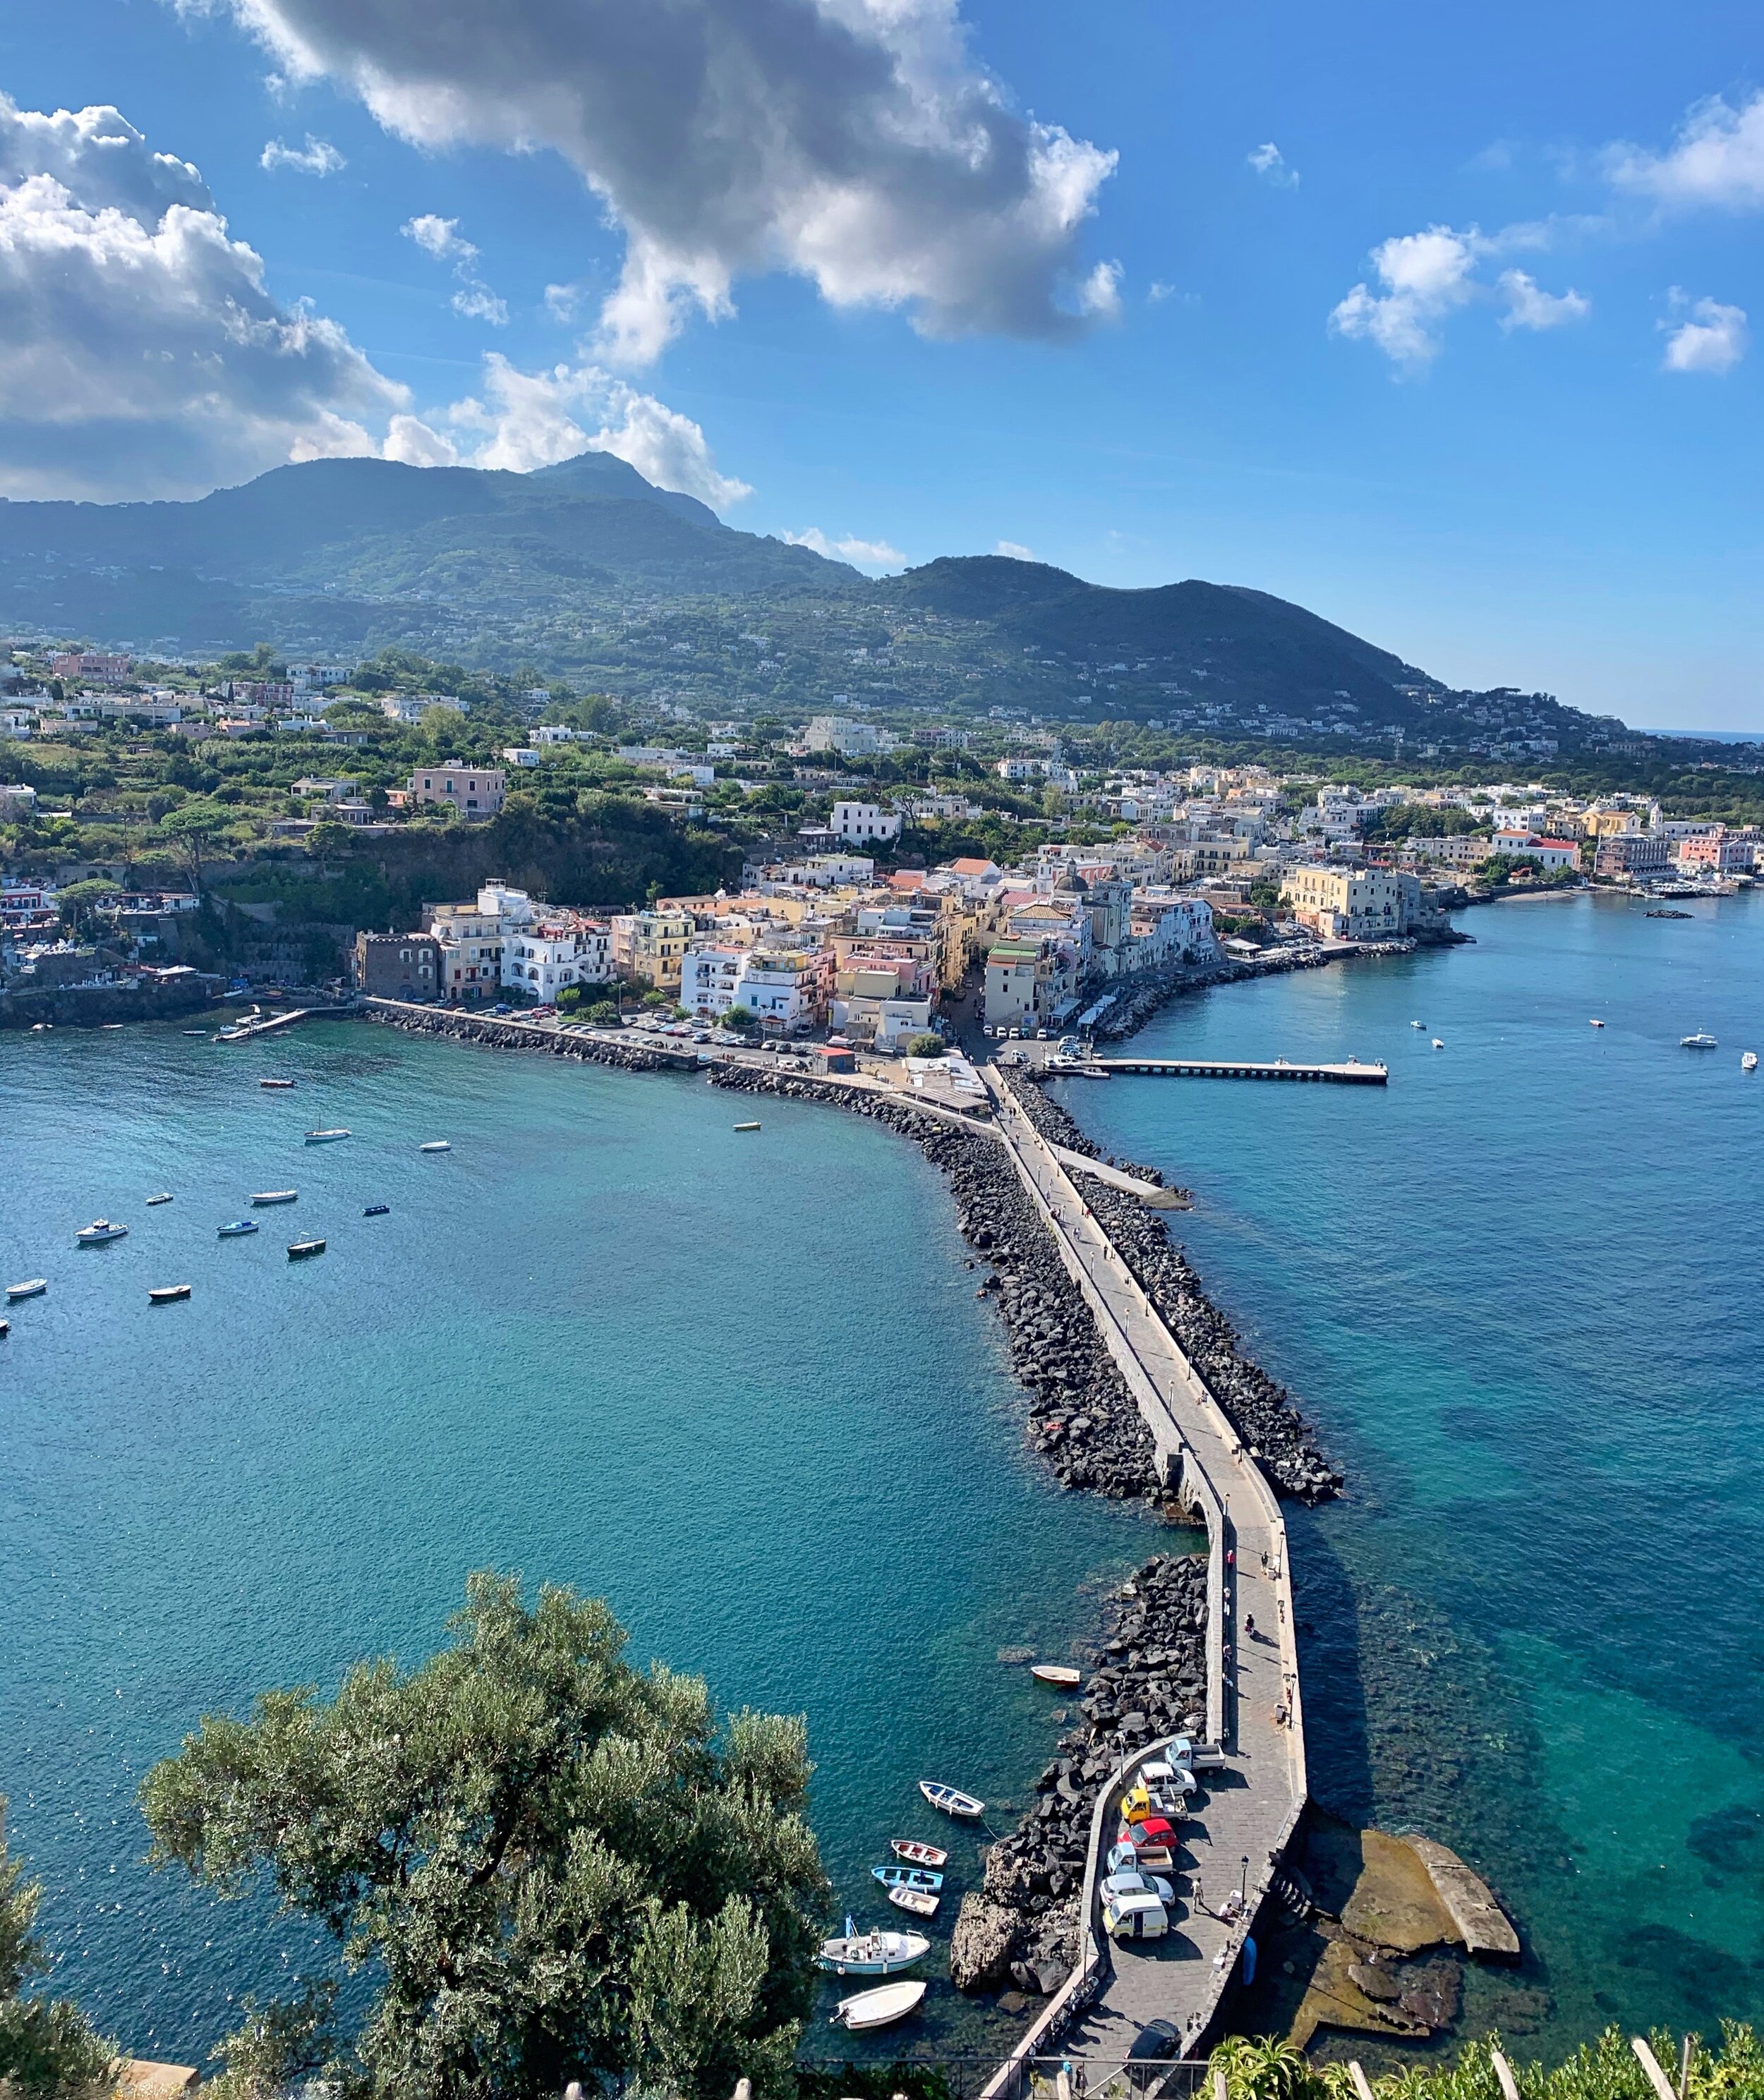 A view from Castello Aragonese in Ischia, Italy on a yoga retreat